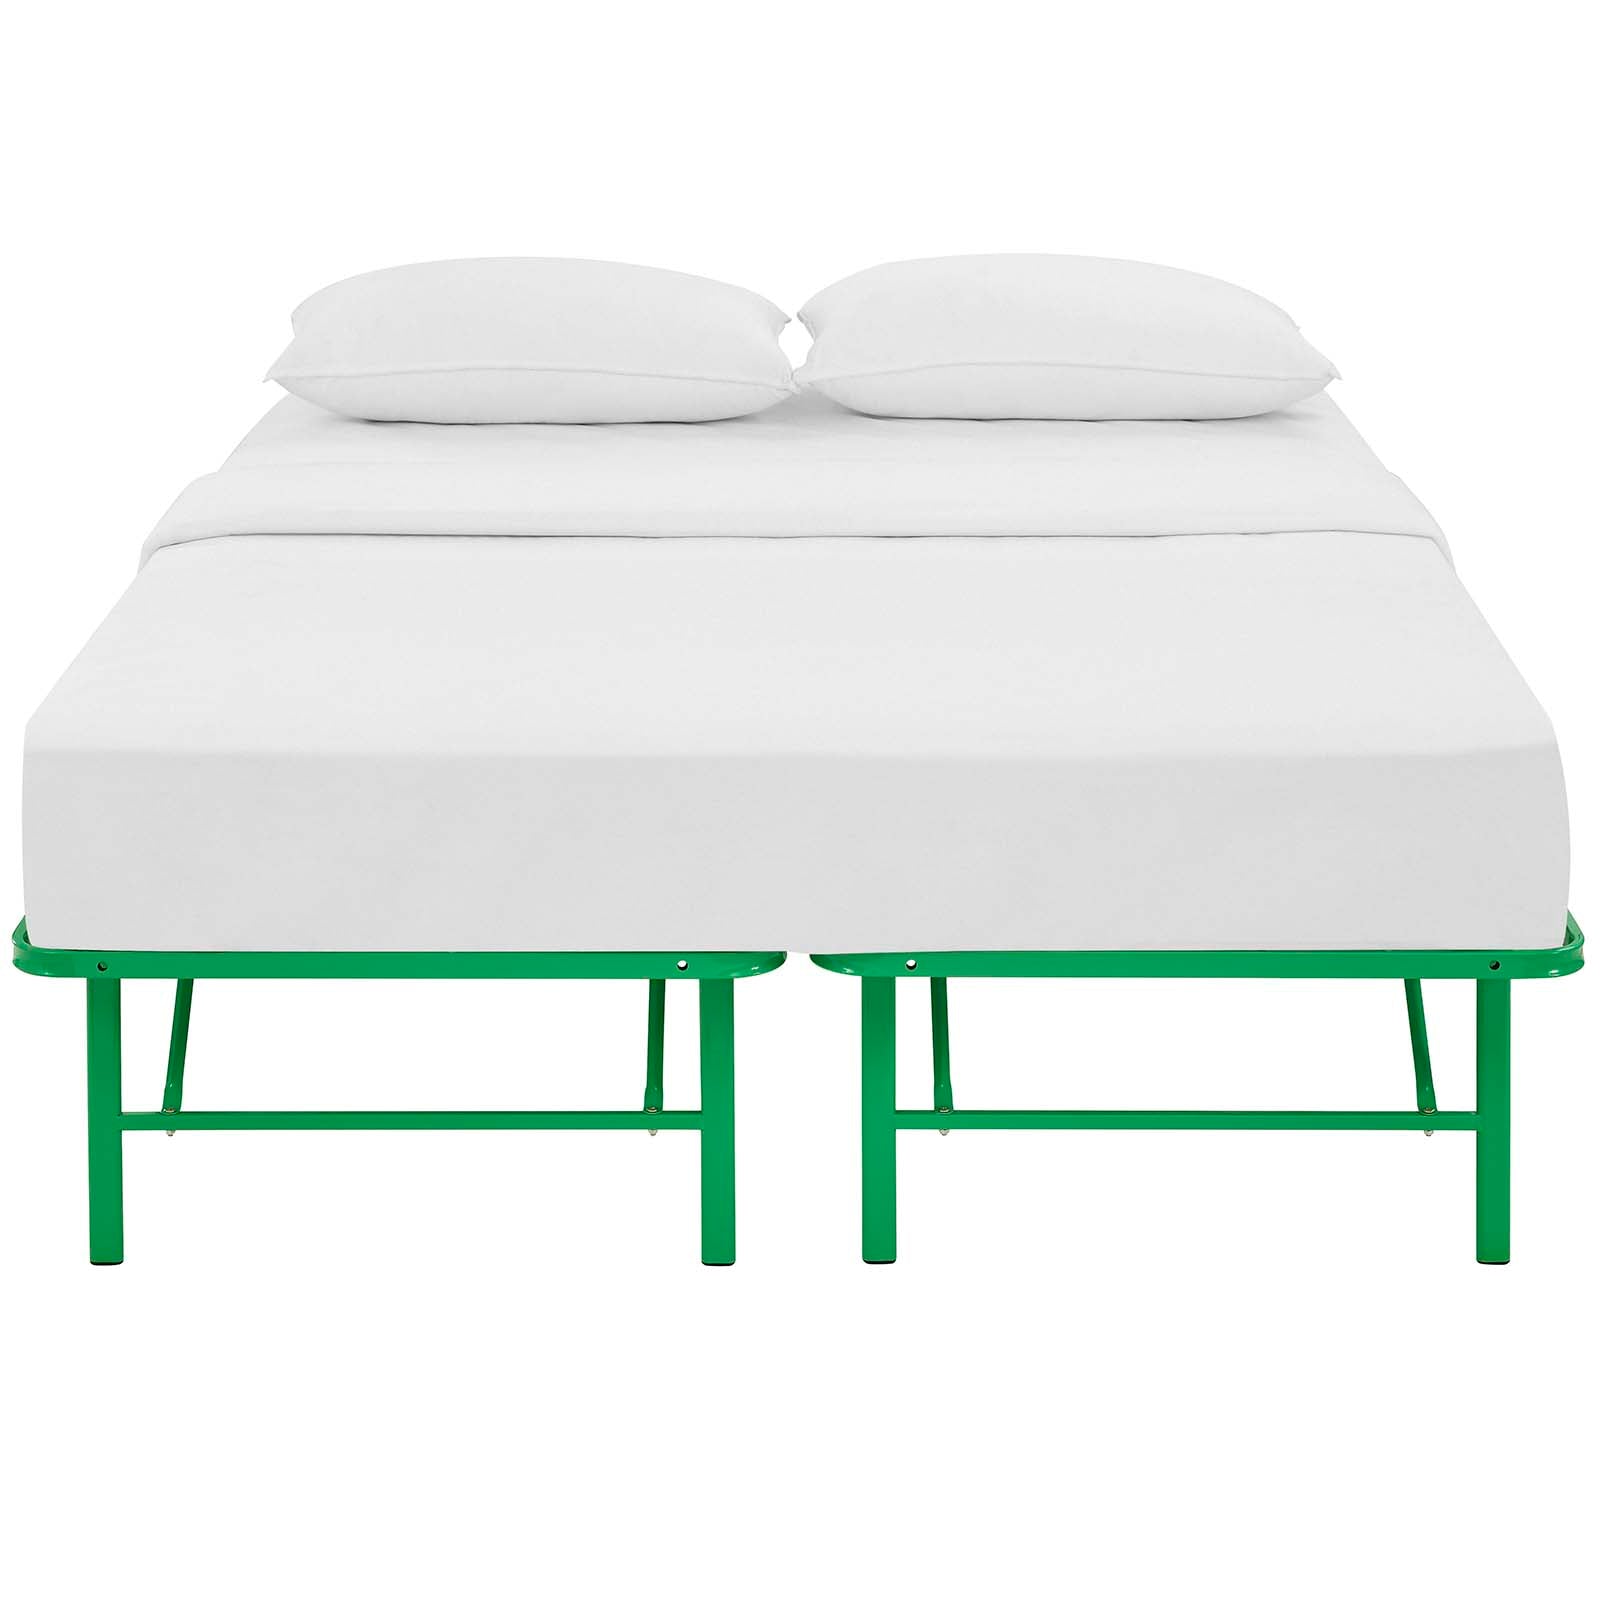 Modway Beds - Horizon Queen Stainless Steel Bed Frame Green